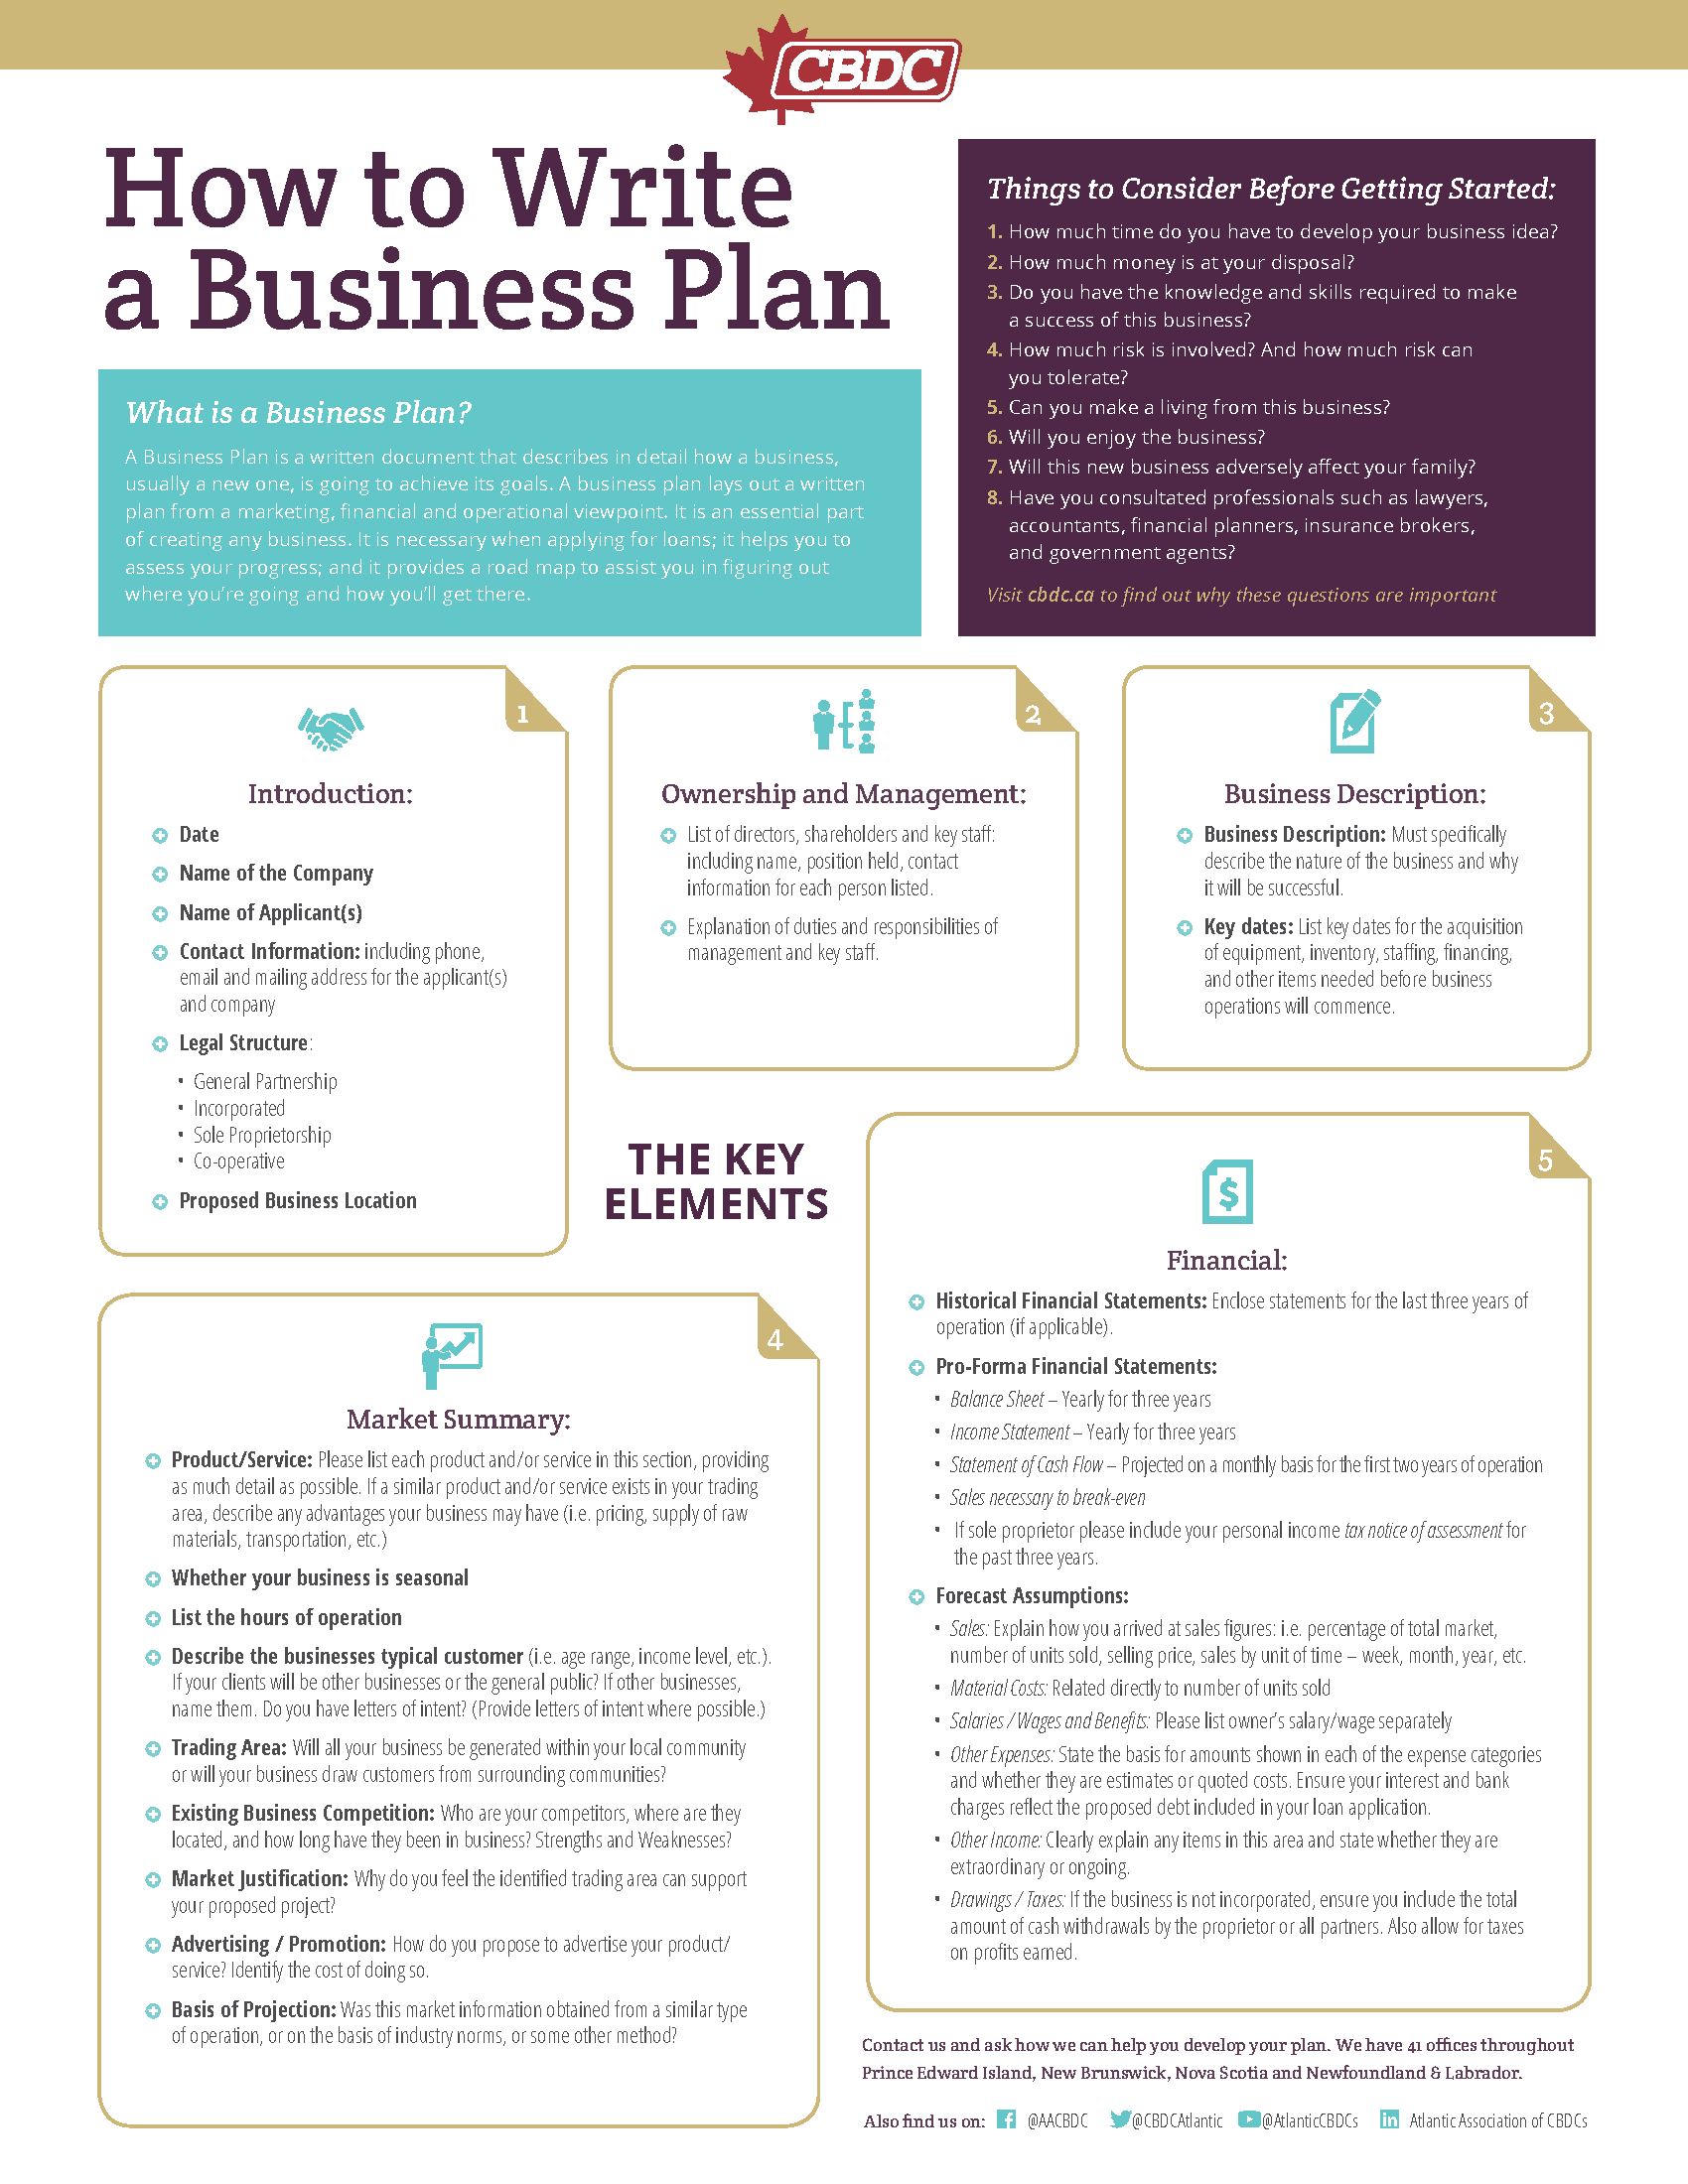 who can write the business plan